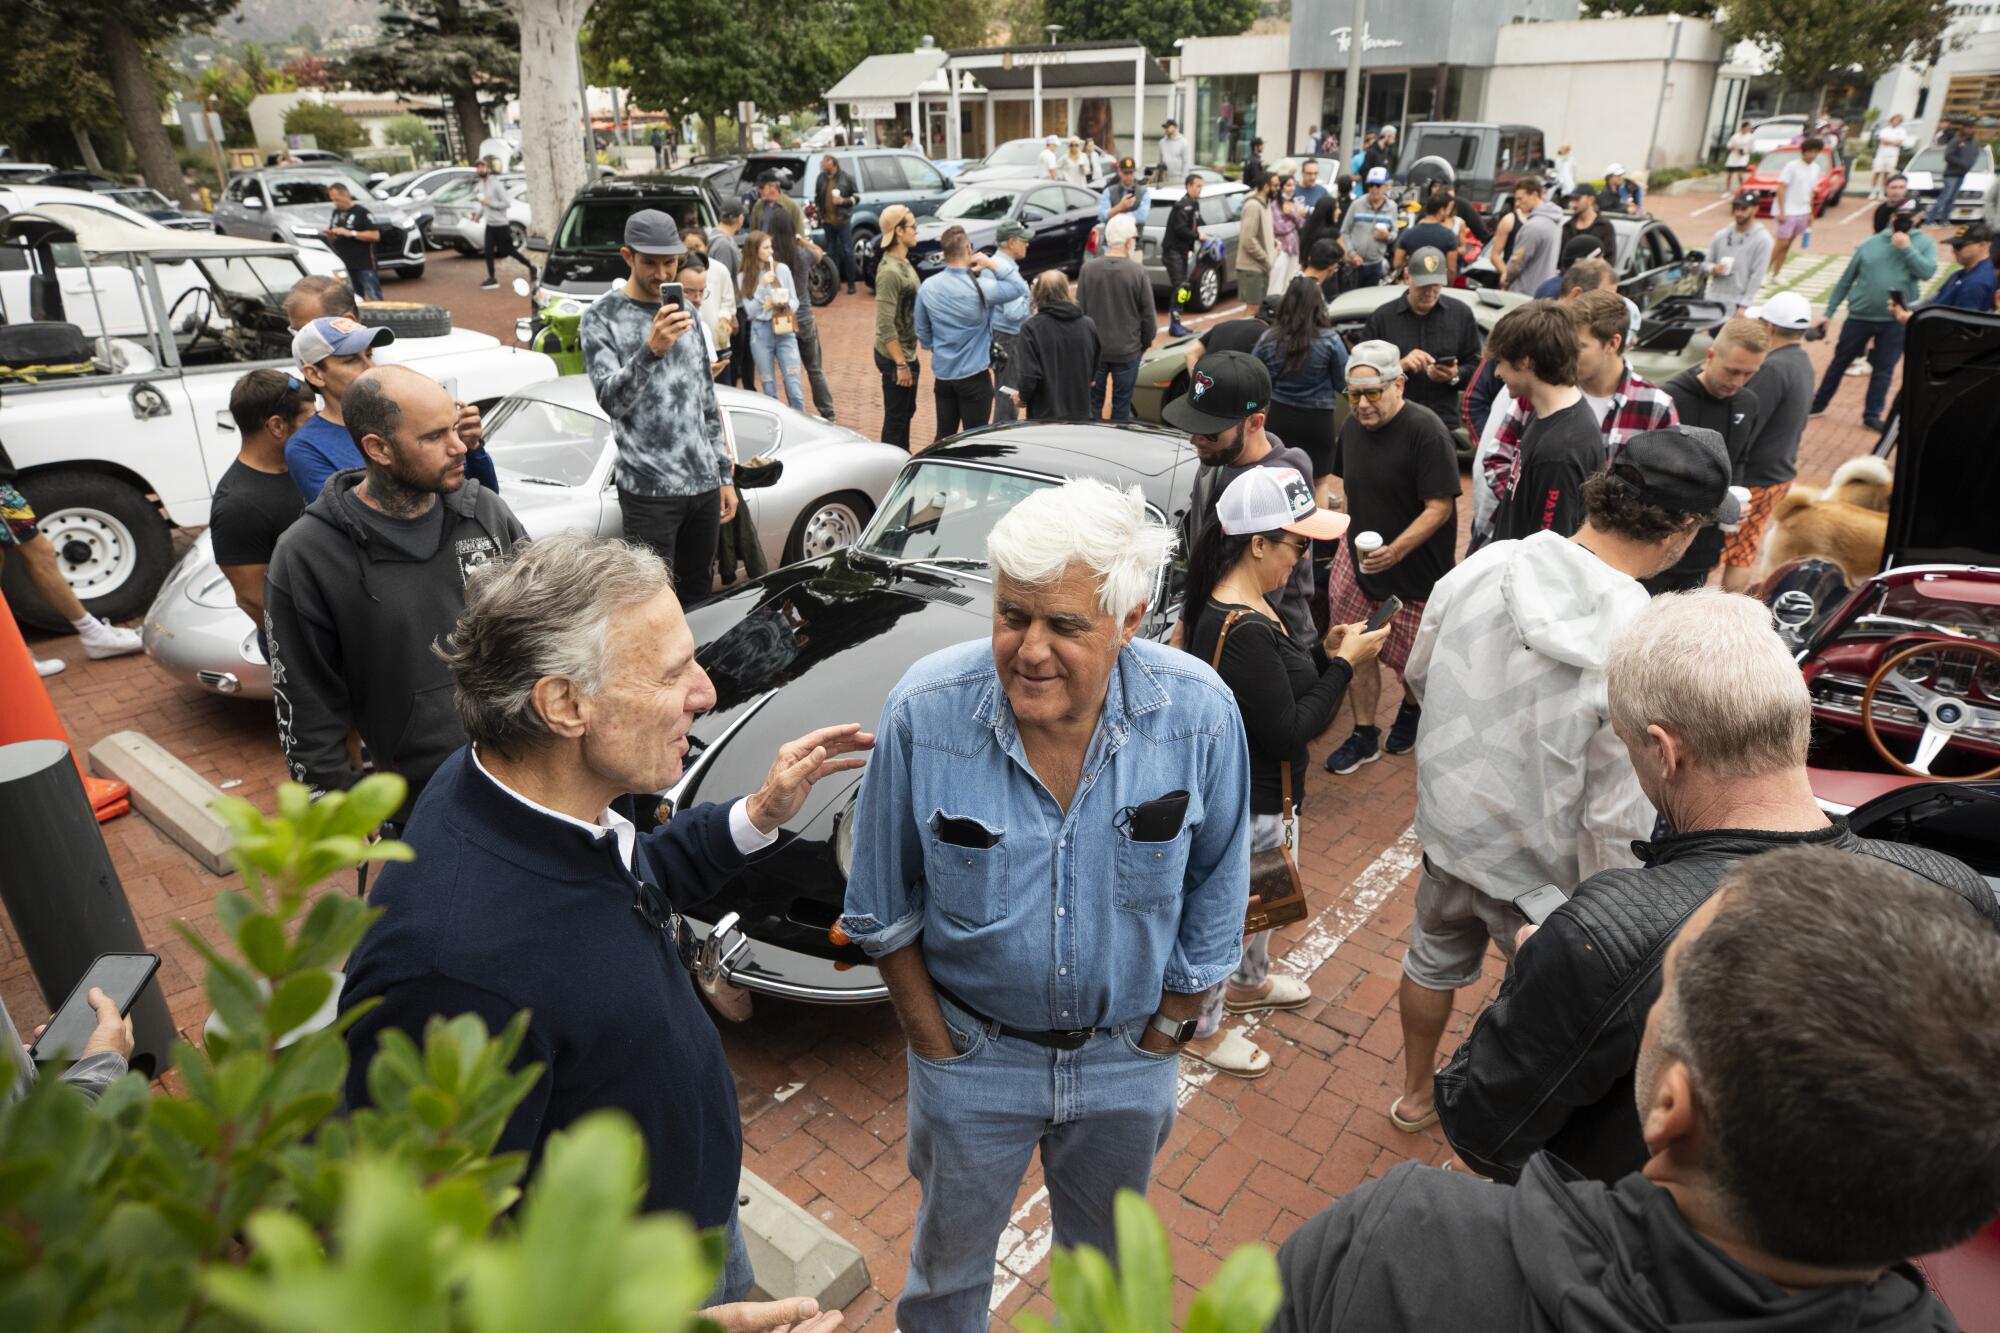 Bruce Meyer, left, chats with Jay Leno chat at the Malibu Country Market.